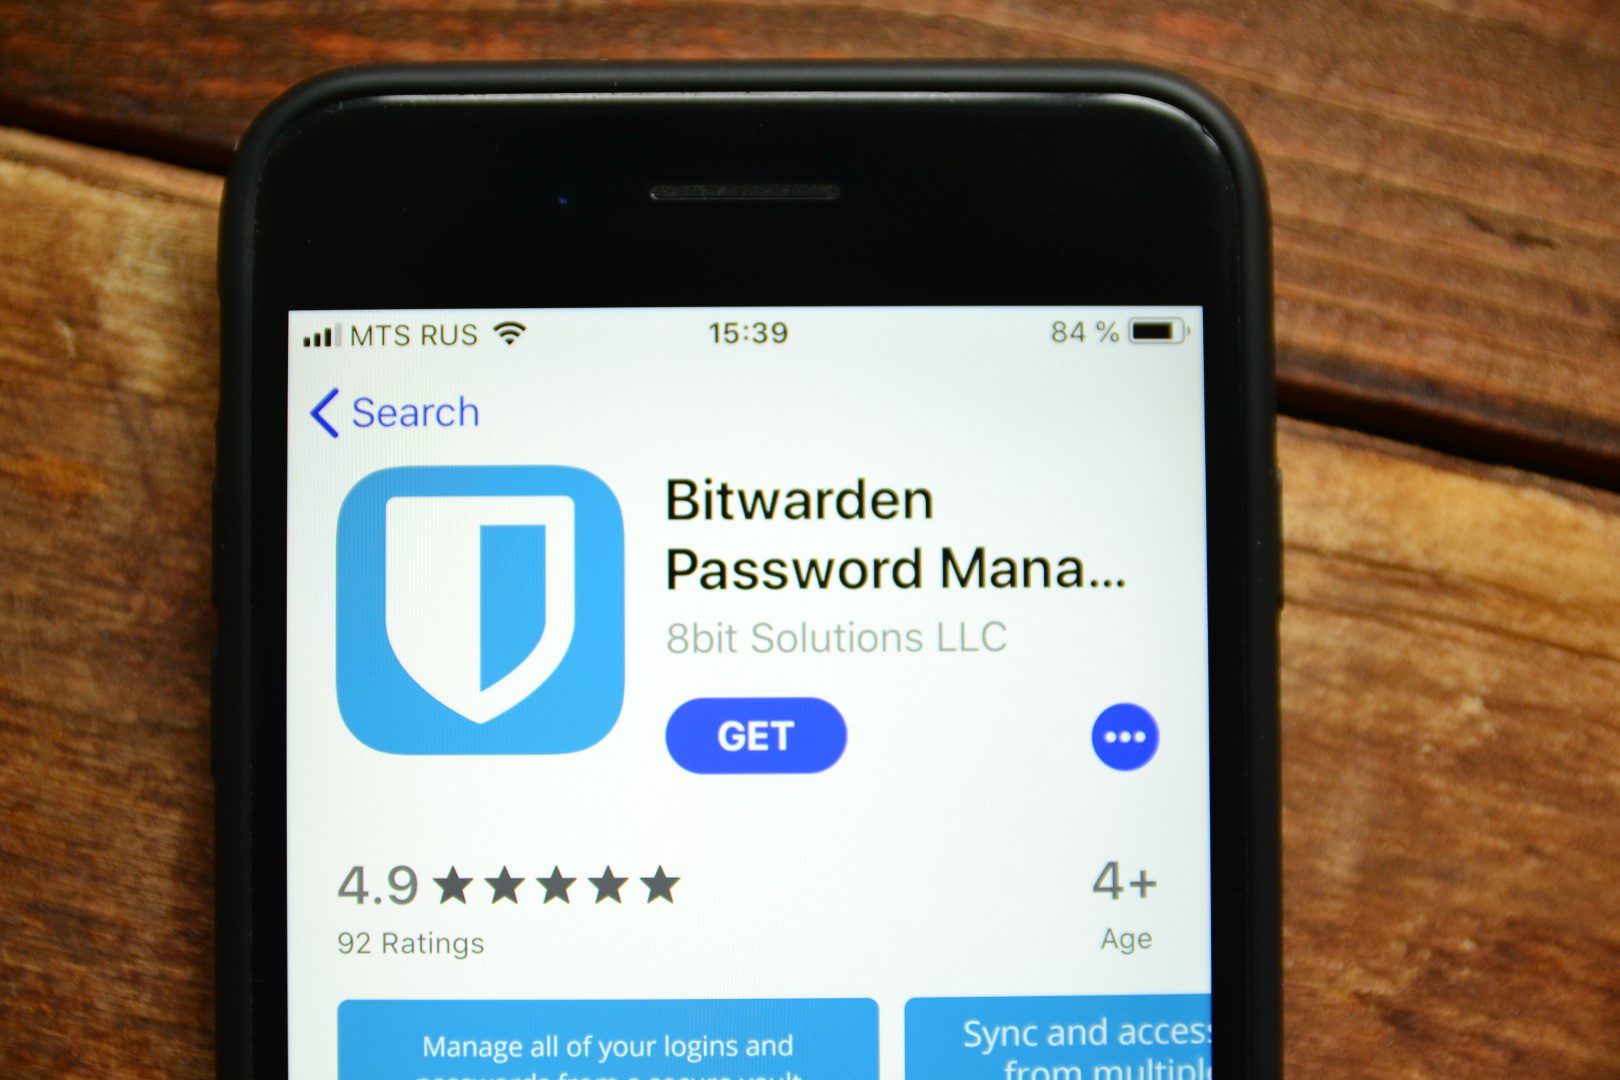 Bitwarden launches authenticator app for Android and iOS